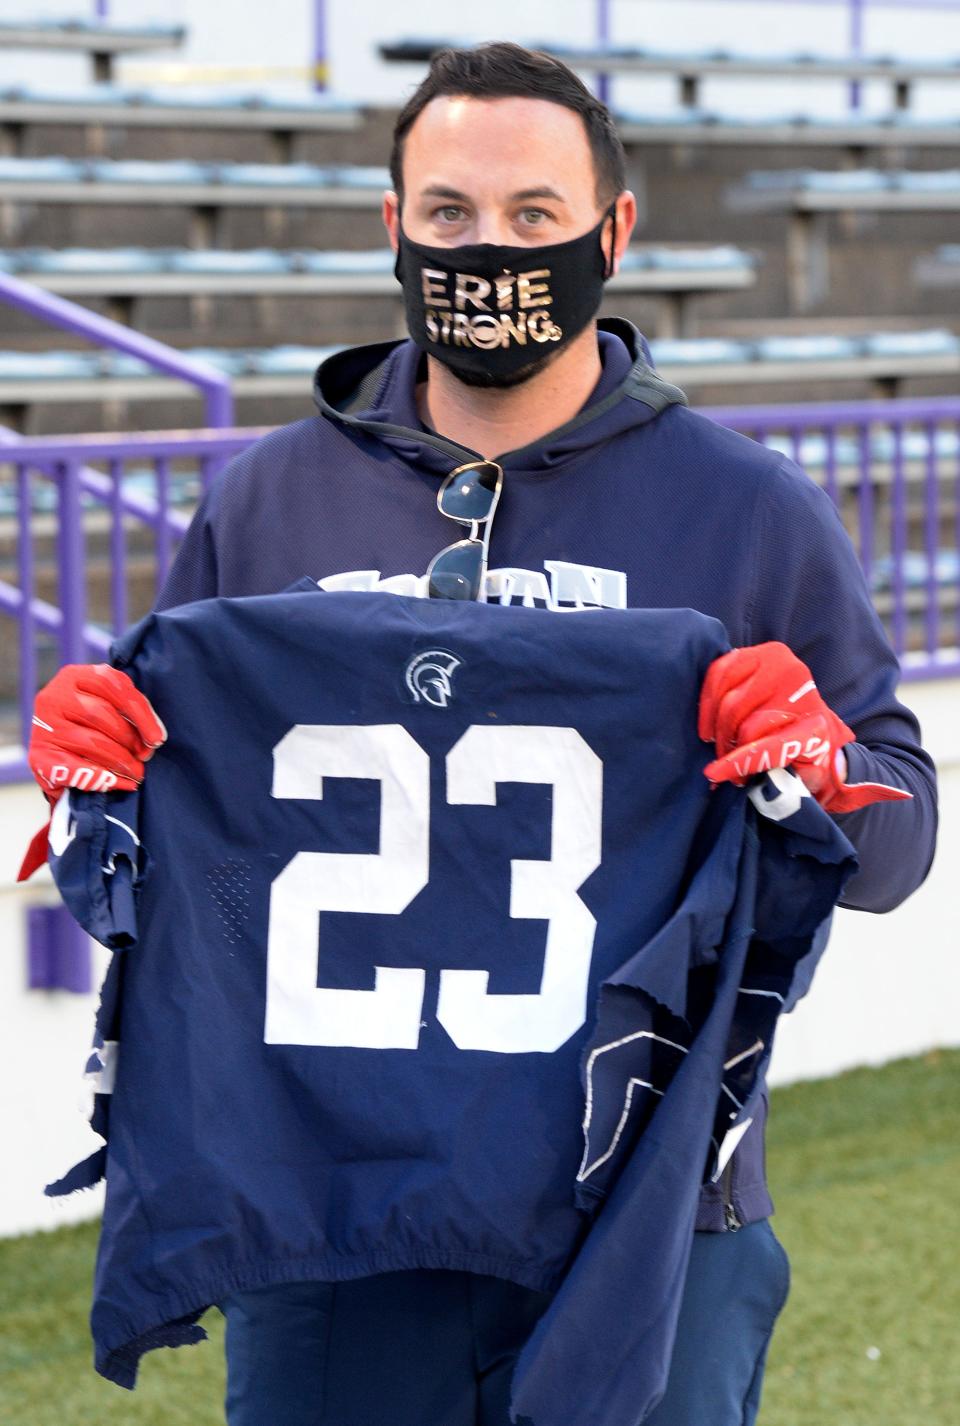 Brandon Beasley, the stepfather of former McDowell High School football player Jonathan Heubel, has supported Heubel throughout his legal ordeal. Beasley is shown on Oct. 23, 2020, at Erie Veterans Stadium before the McDowell vs. Erie High game. Heubel, who wore number 23, collapsed with a traumatic brain injury during a game against Cathedral Preparatory School about a week earlier.